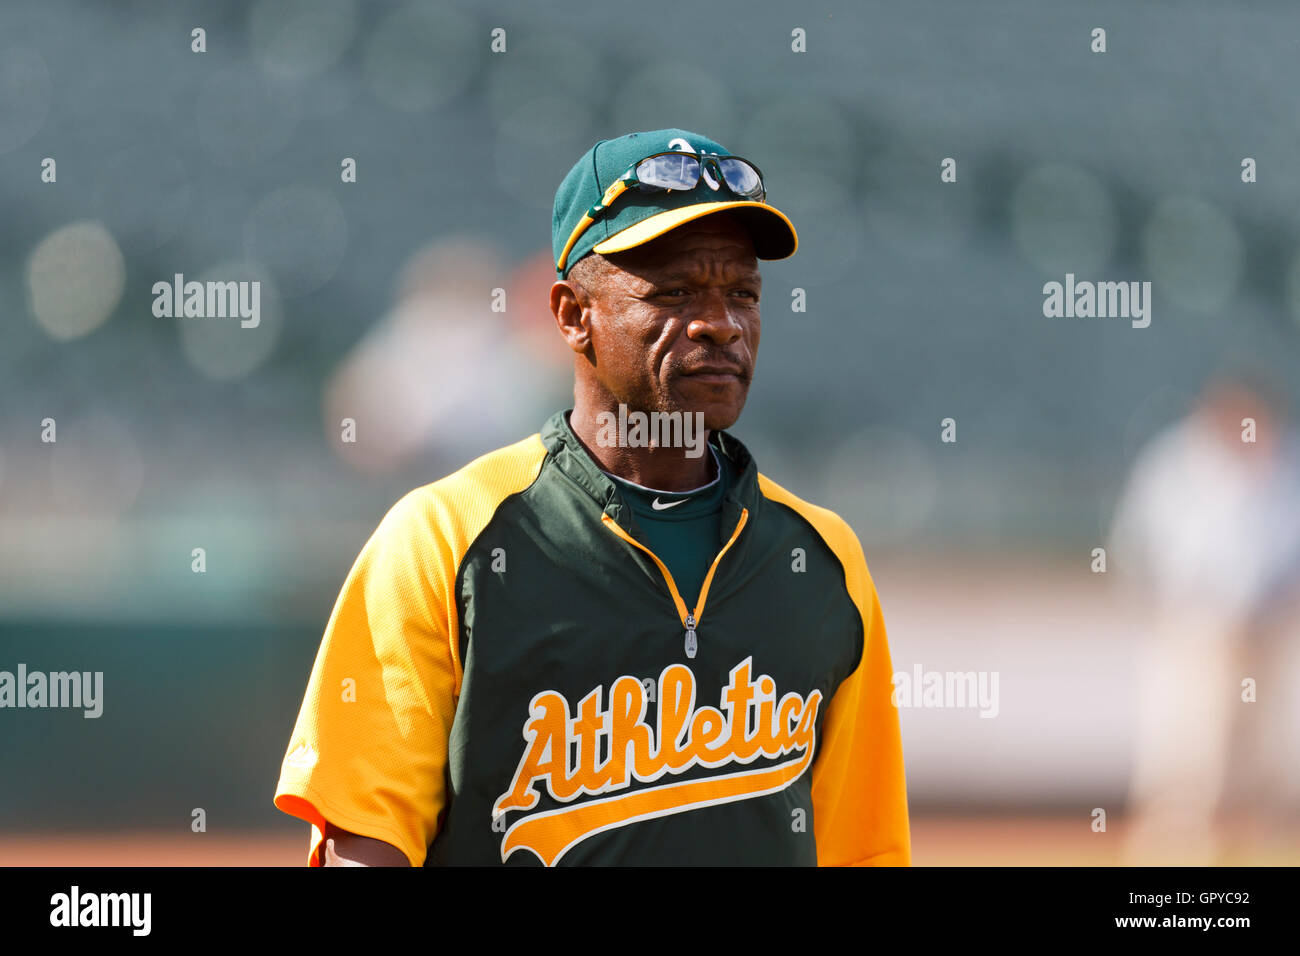 Rickey henderson athletics hi-res stock photography and images - Alamy